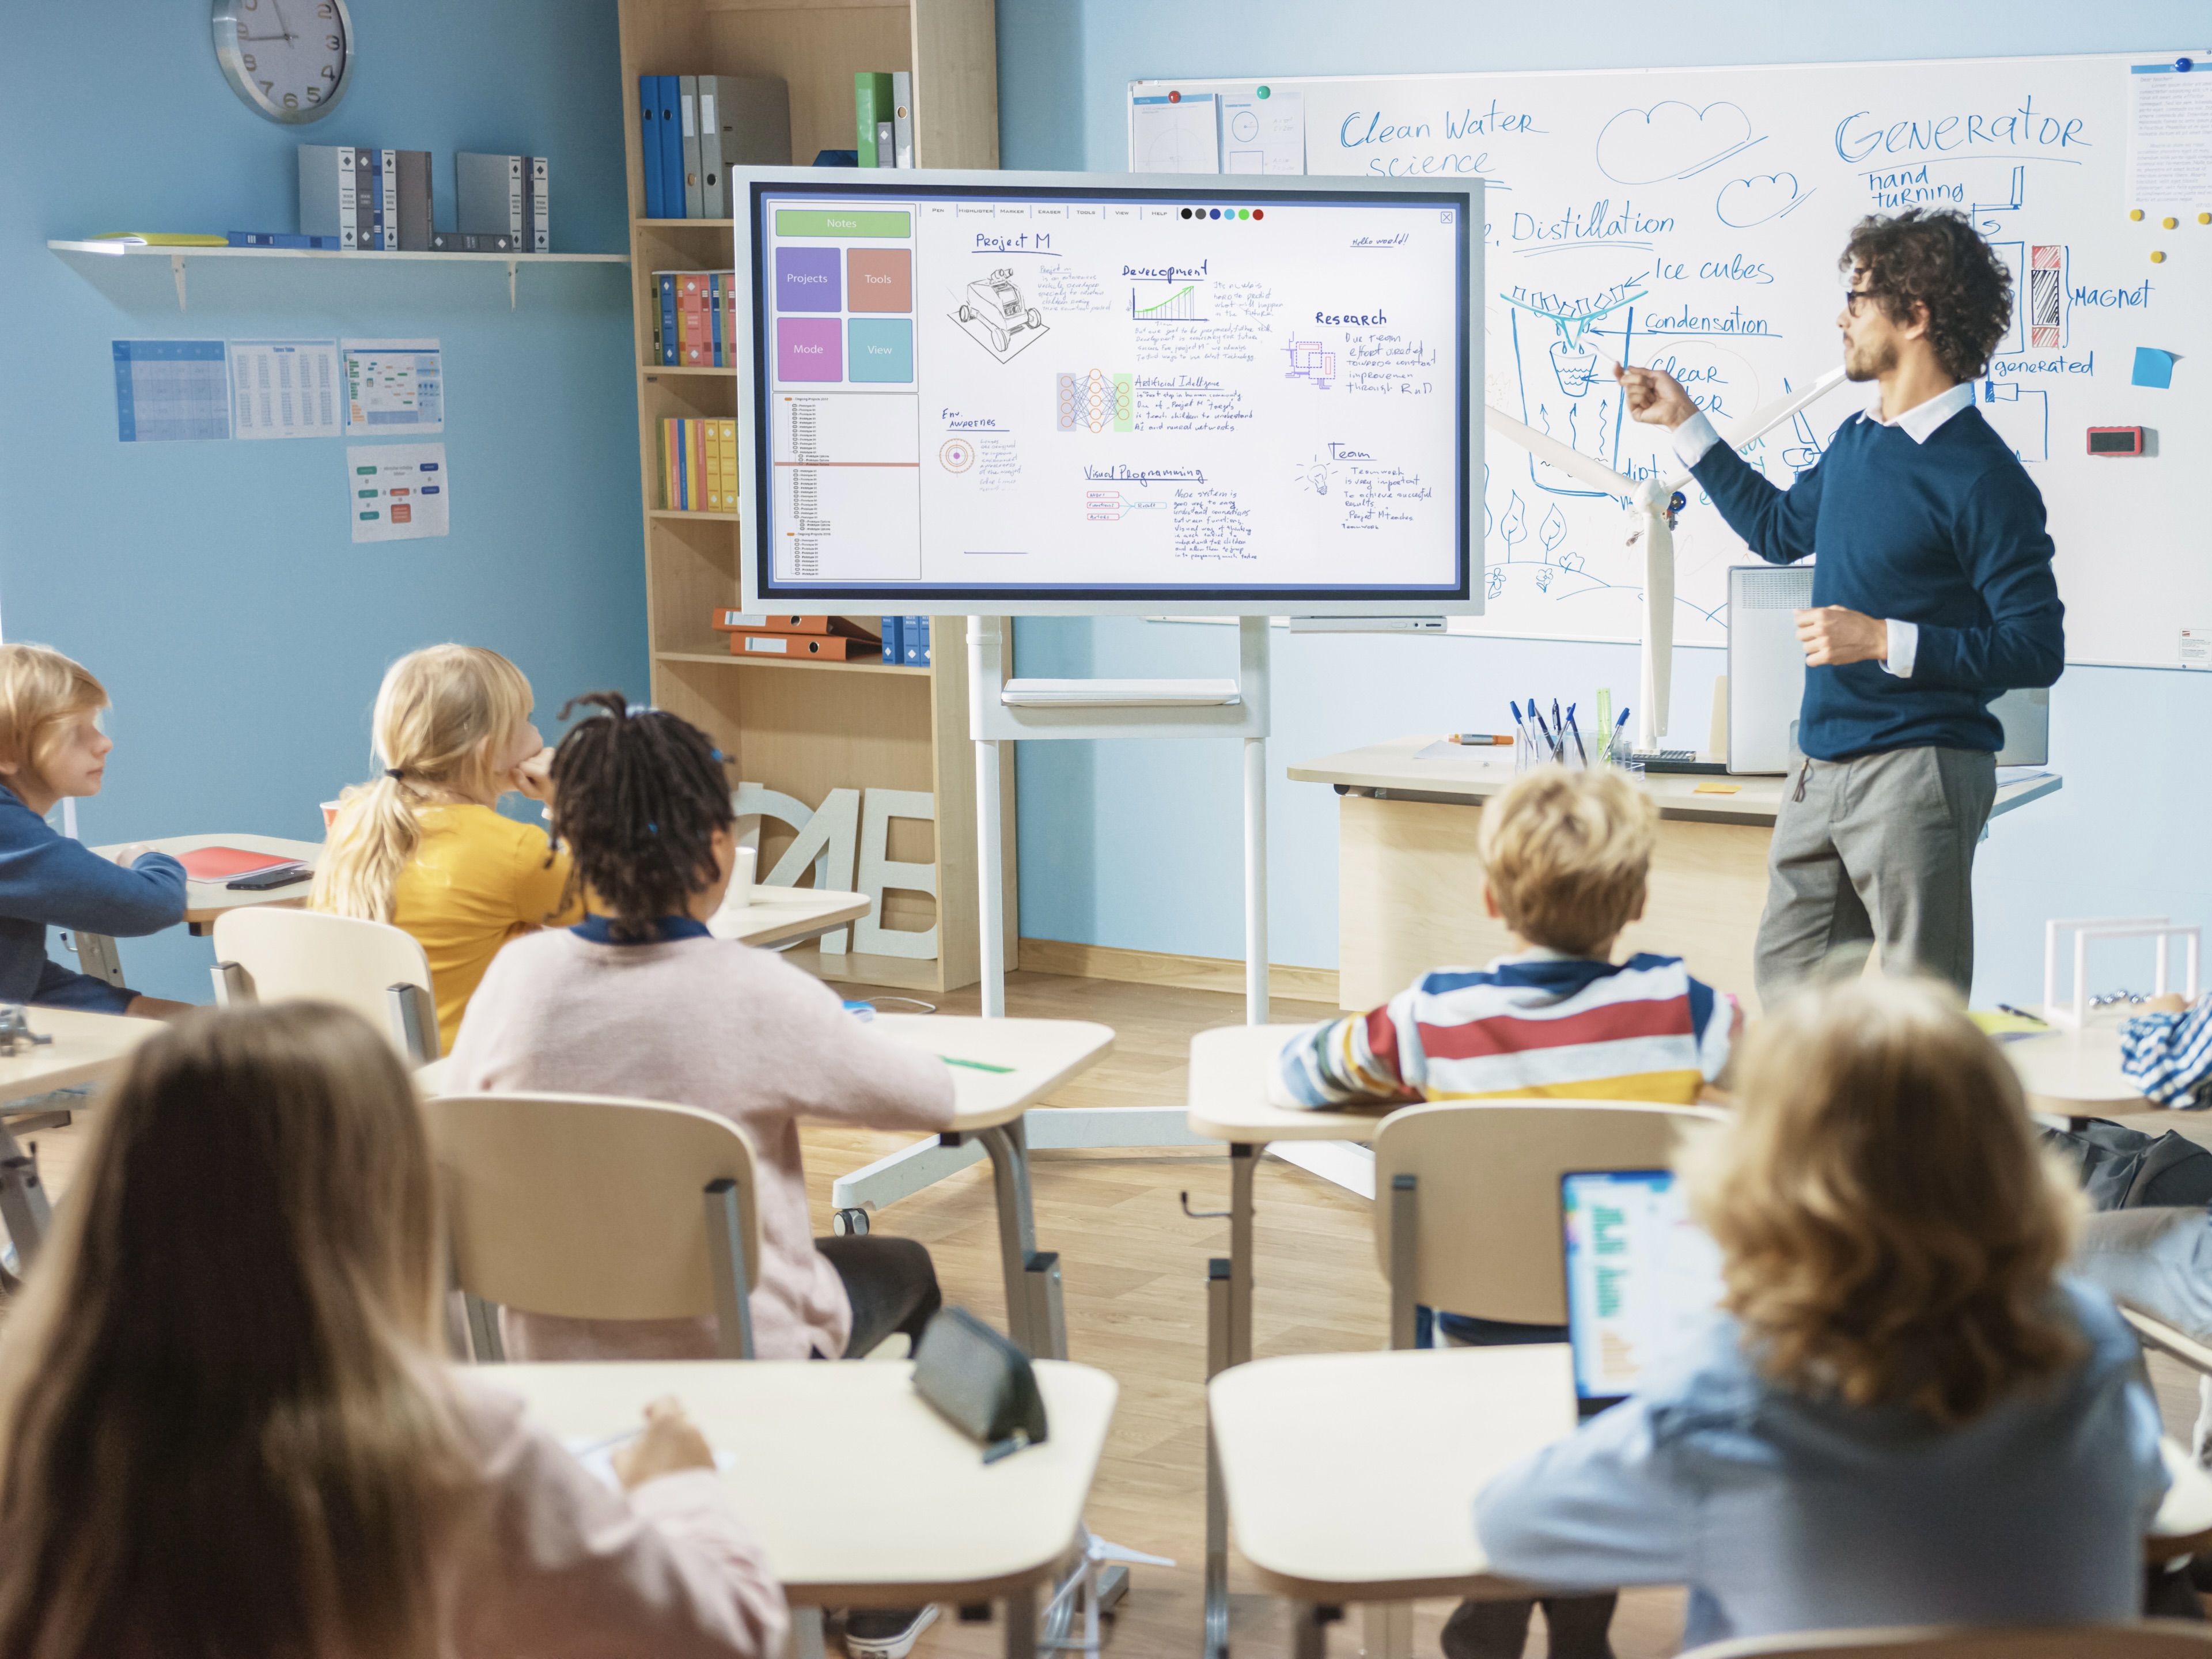 A classroom of children looks at a digital display as their teacher indicates something on the board.